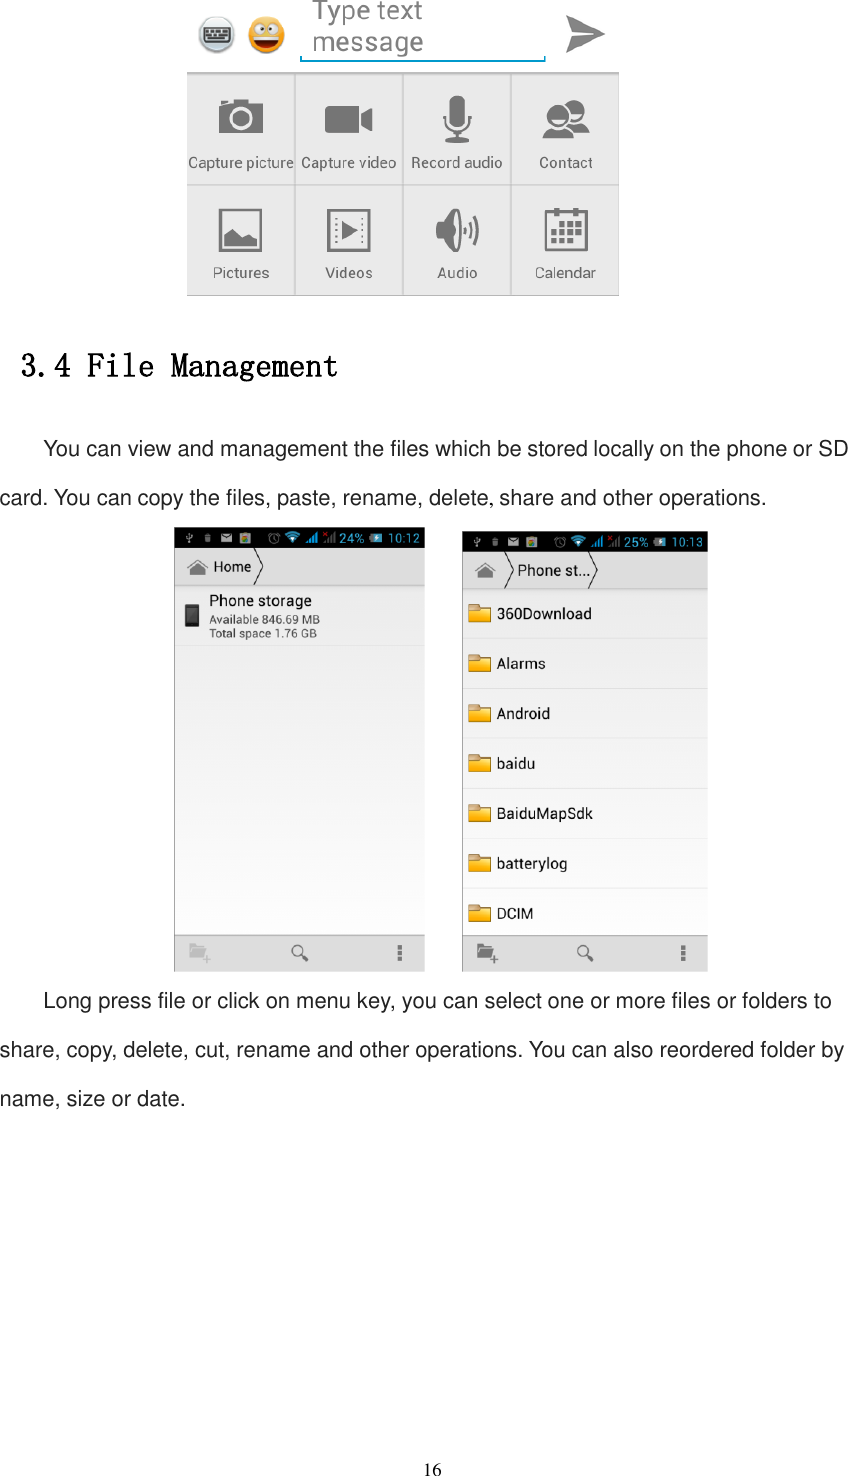   16  3.4 File Management You can view and management the files which be stored locally on the phone or SD card. You can copy the files, paste, rename, delete, share and other operations.      Long press file or click on menu key, you can select one or more files or folders to share, copy, delete, cut, rename and other operations. You can also reordered folder by name, size or date. 